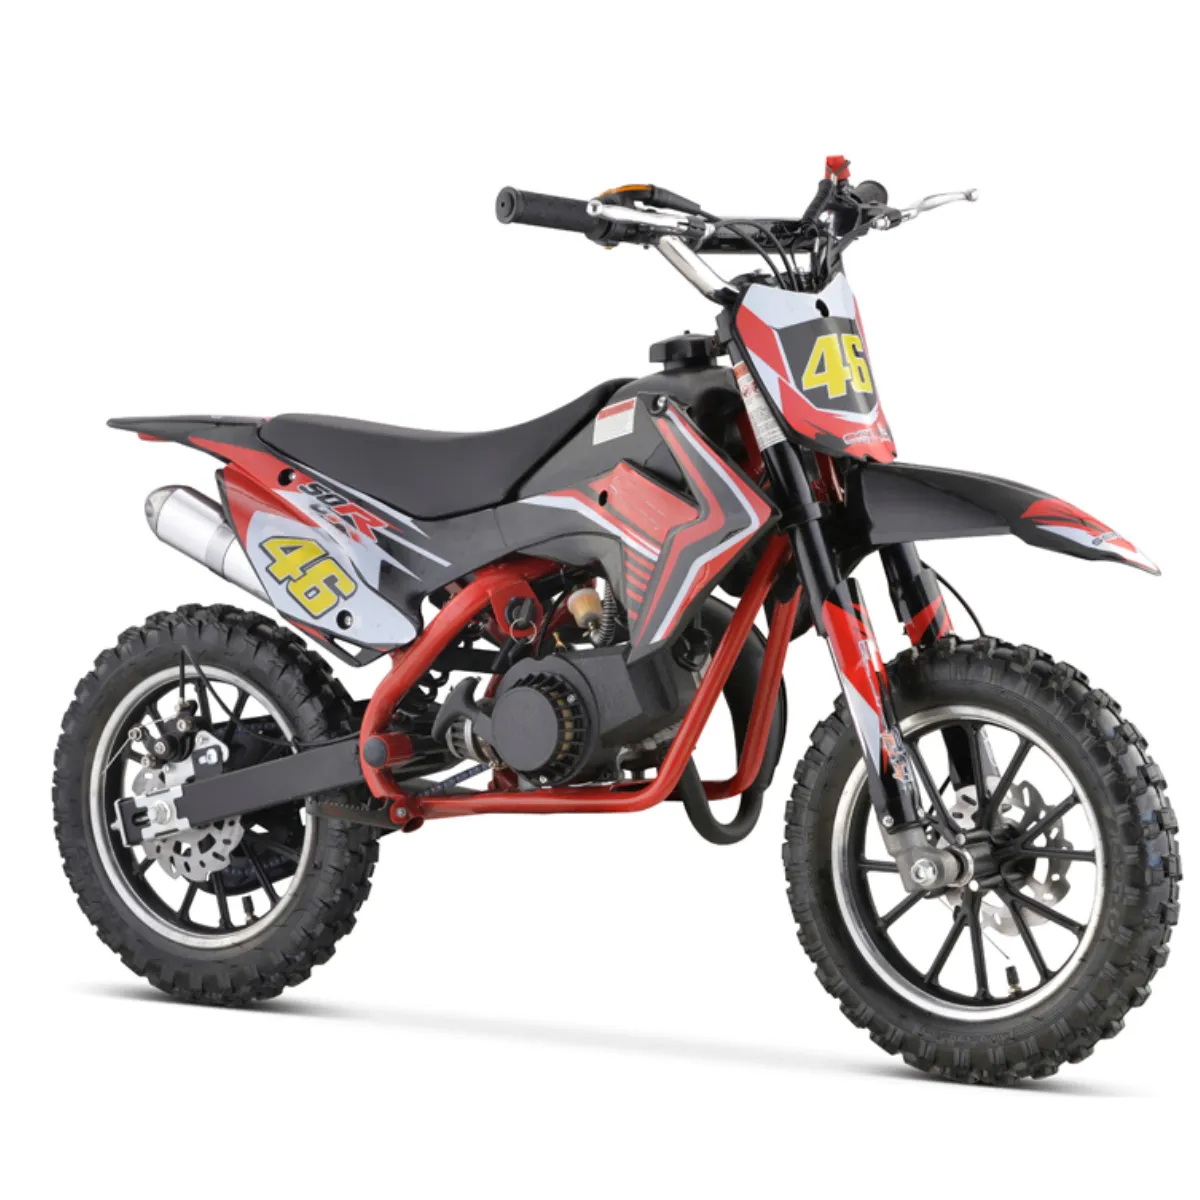 2023 wholesale 50cc gas powered motorcycle enduro dirt bike for $135 spare parts sale